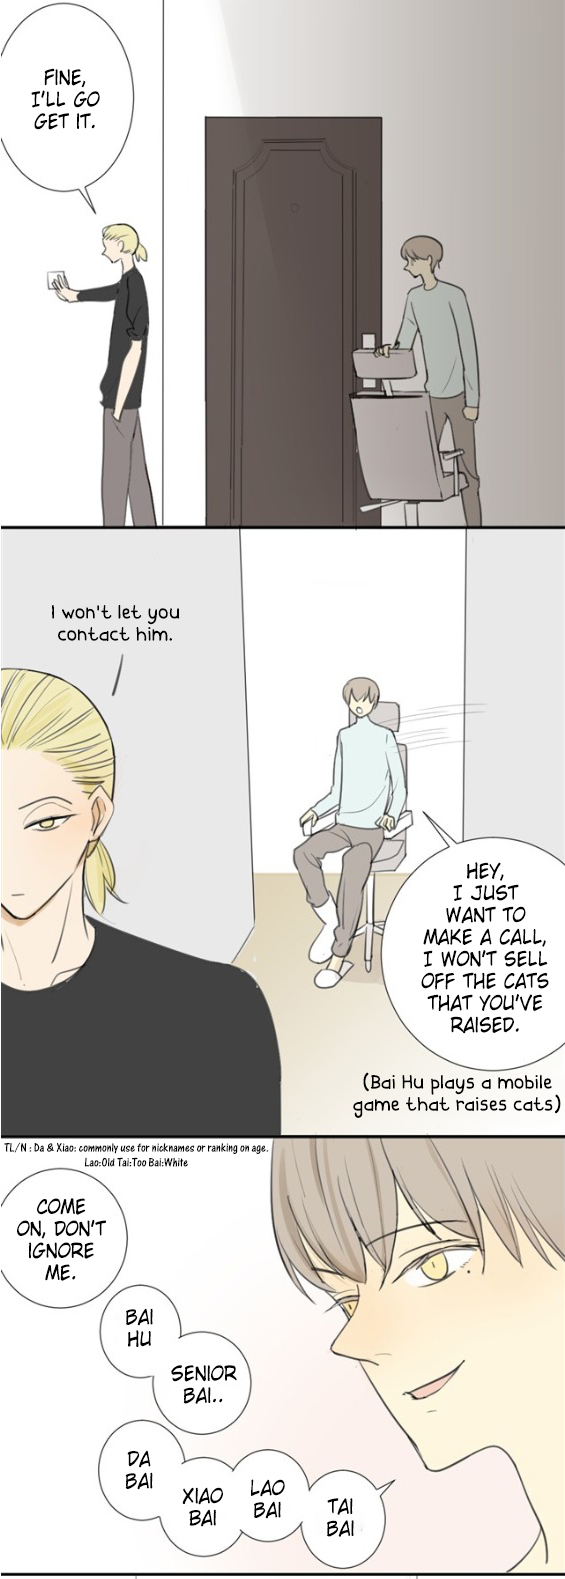 Classmate Relationship? Ch. 16 Wish to go back to the way we were before.